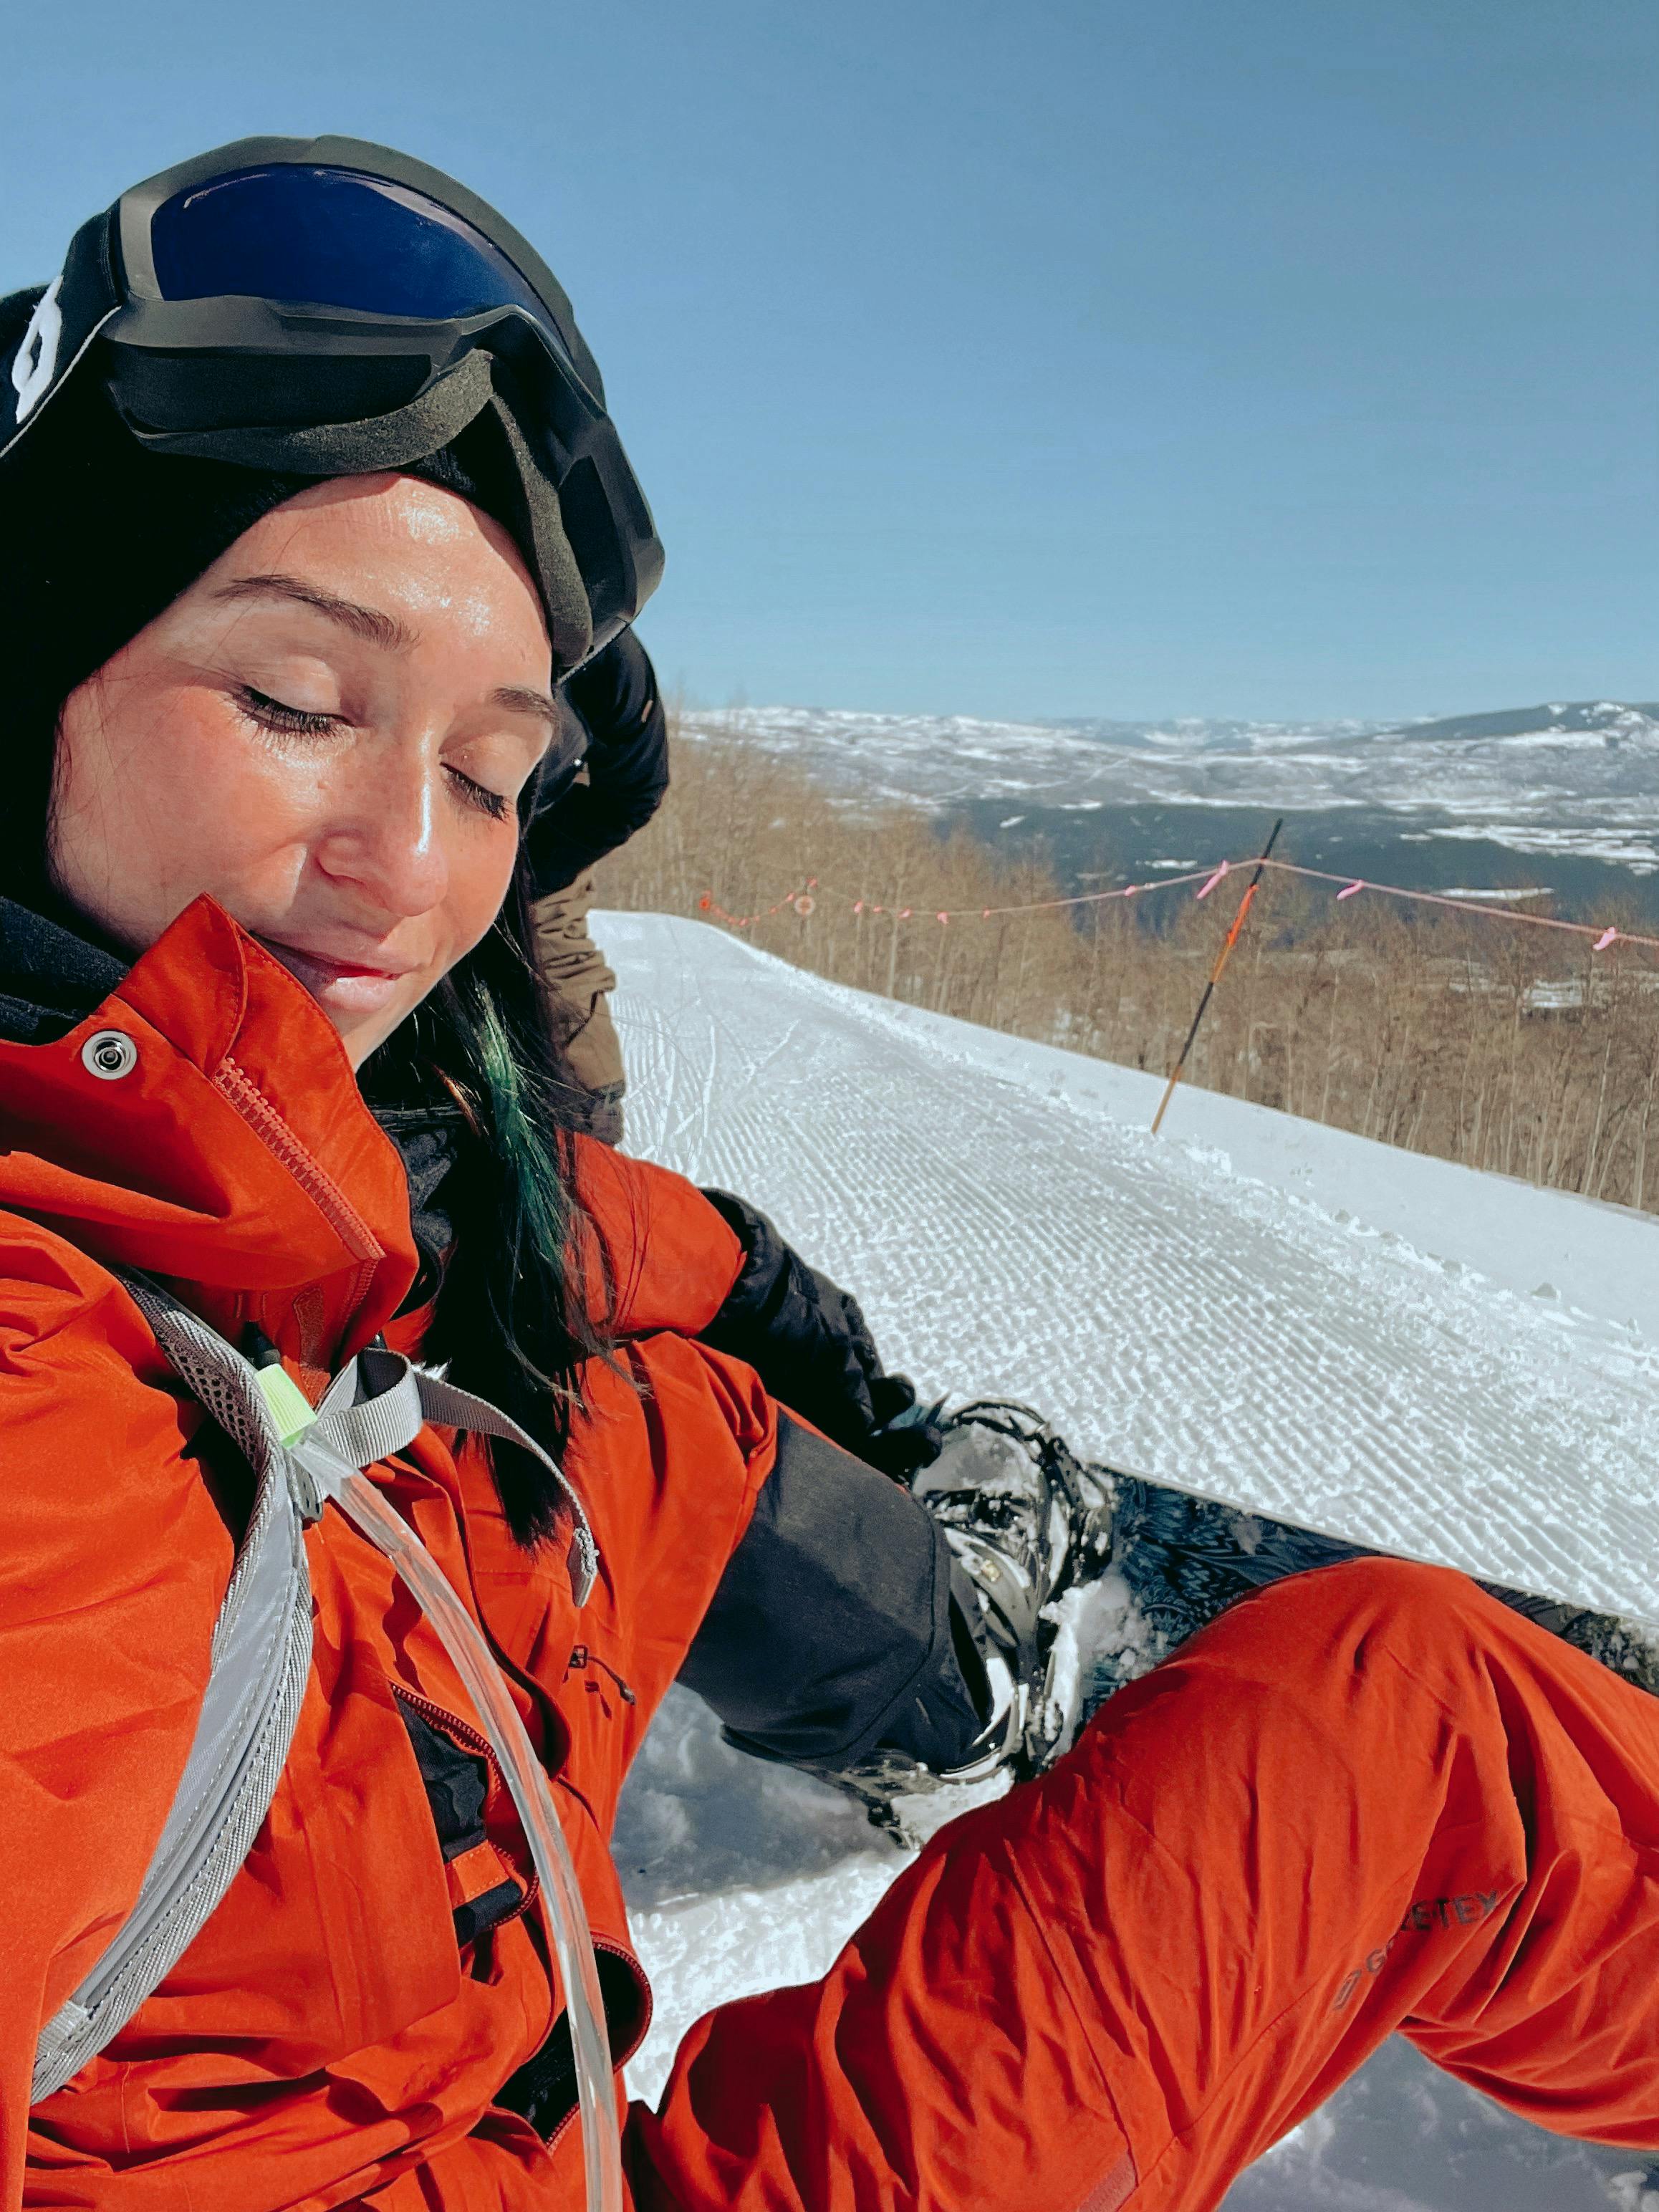 A woman in an orange outfit wearing a snowboard on her feet smiles at the camera. She is sitting on a hill at a ski resort.